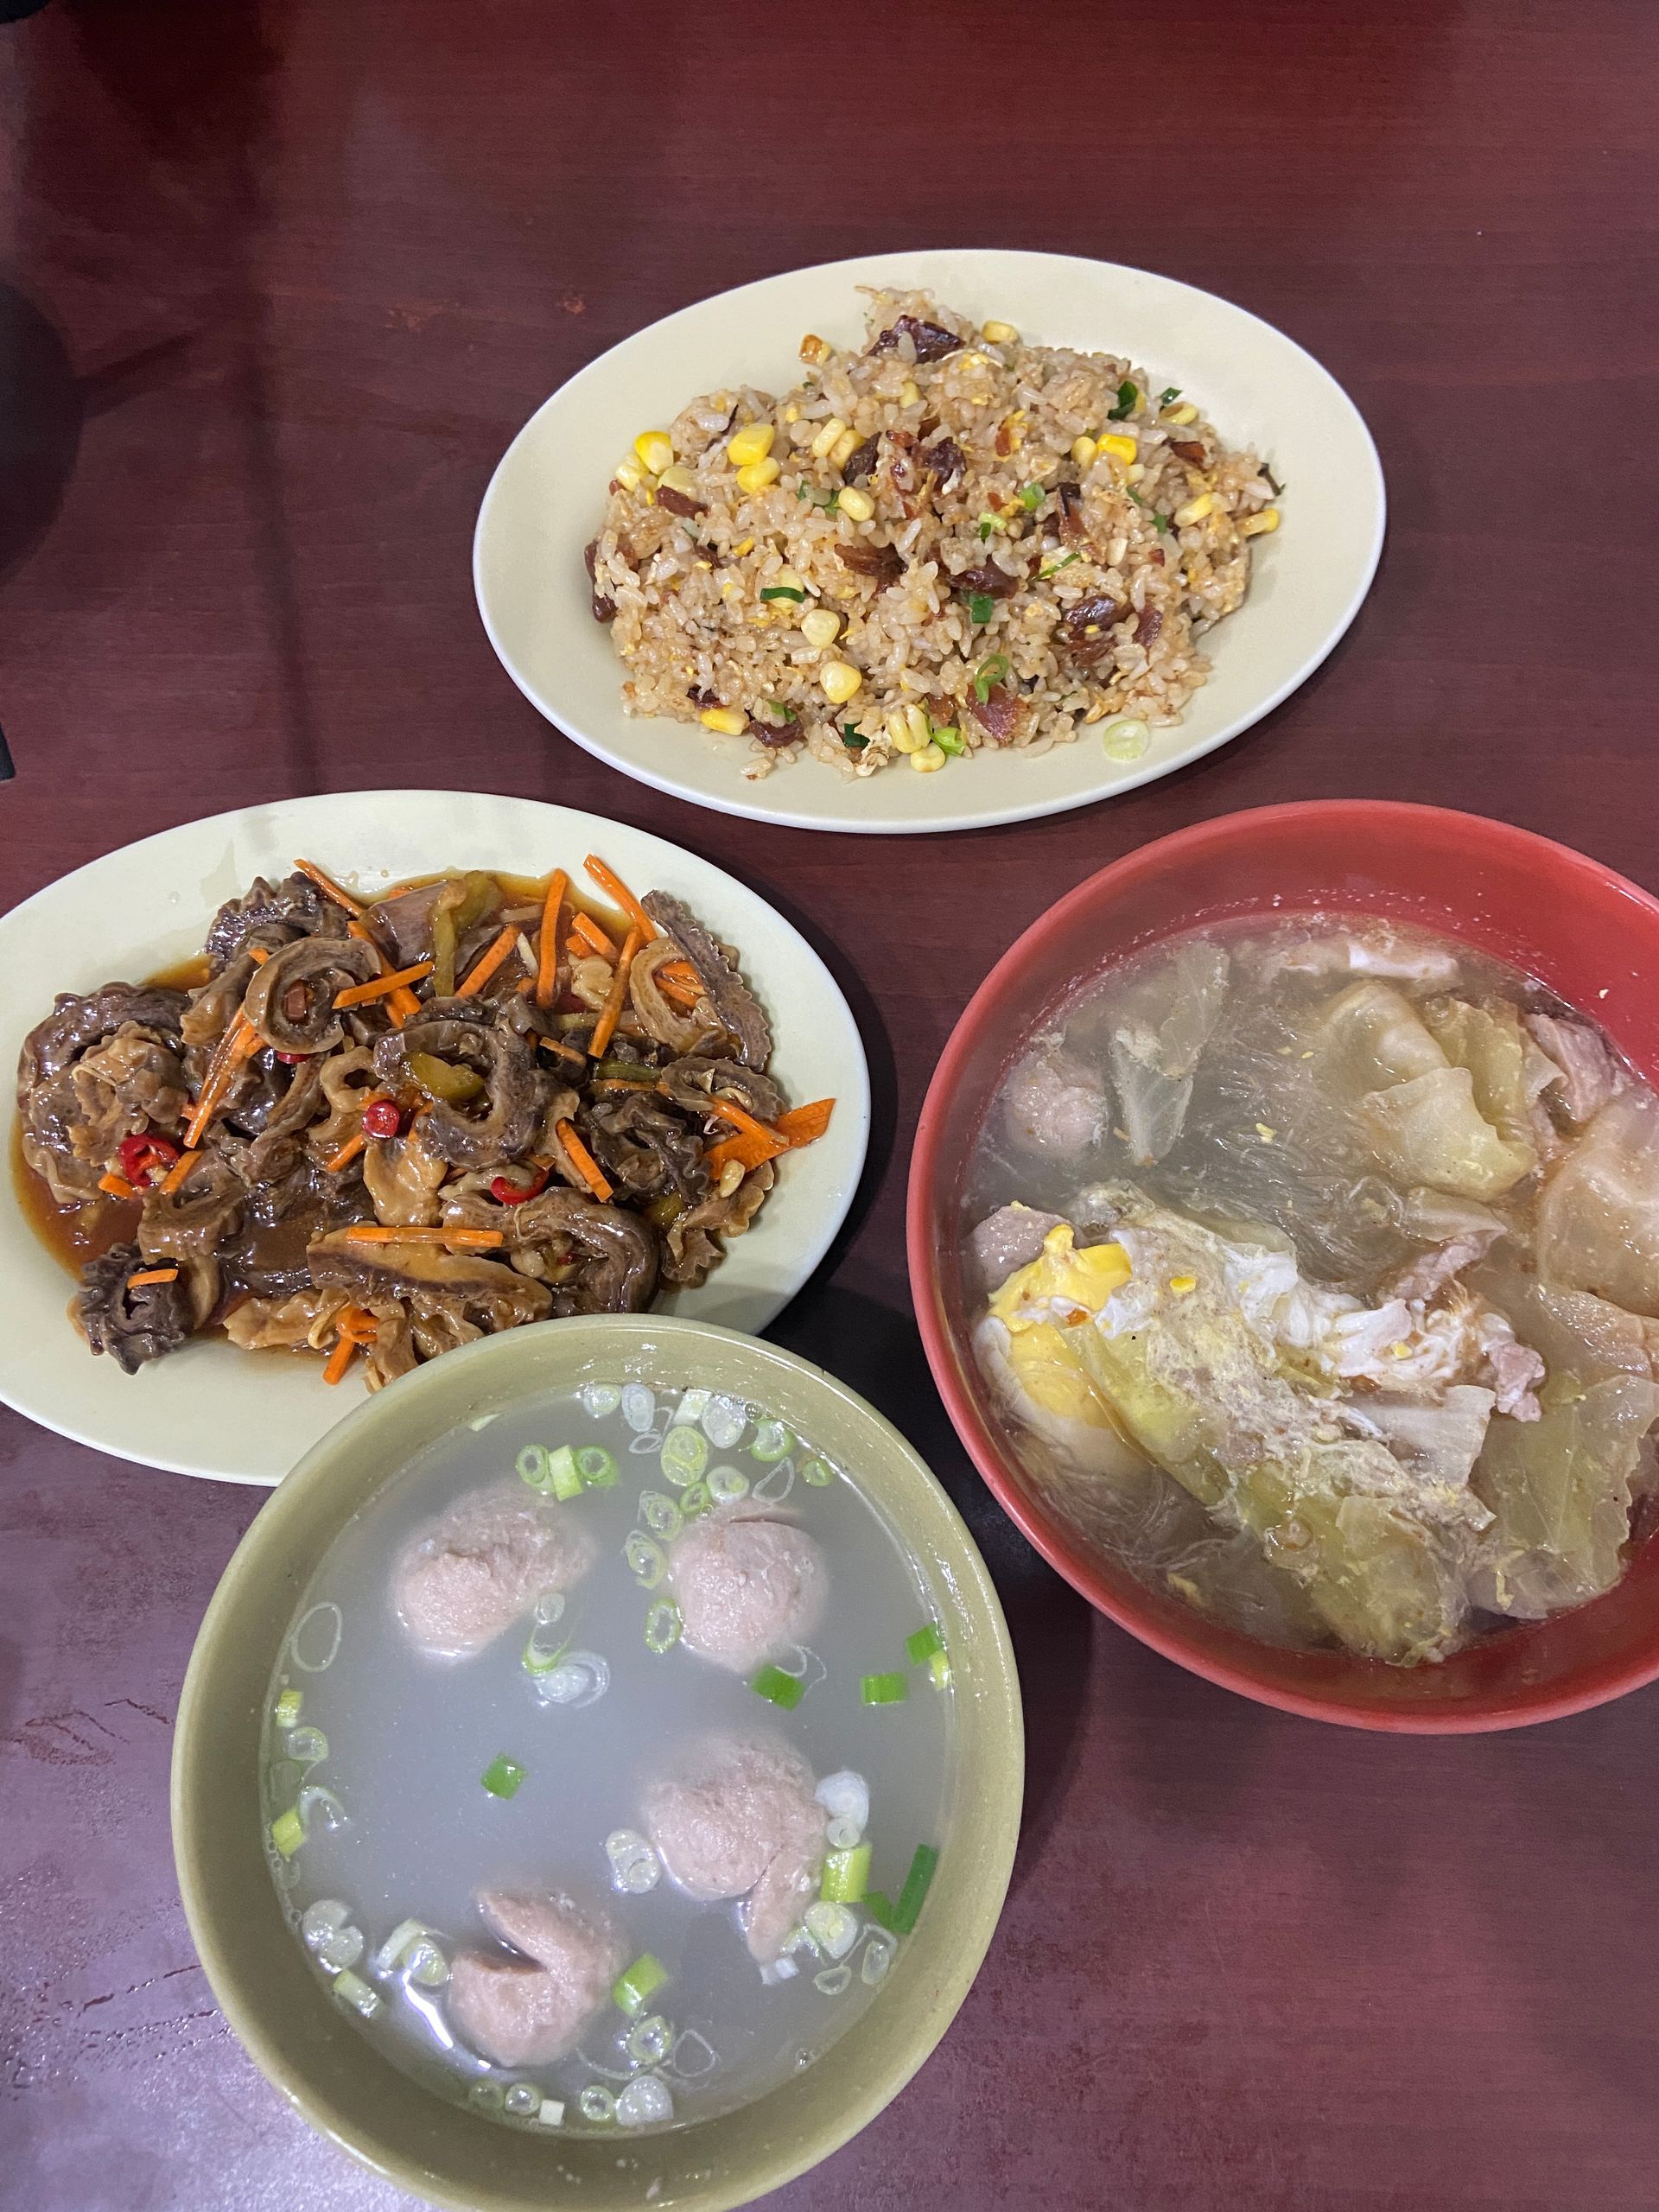 Typical meal at Cai Mama. Meatball soup, fish belly, mahi mahi fried rice and bean noodle soup